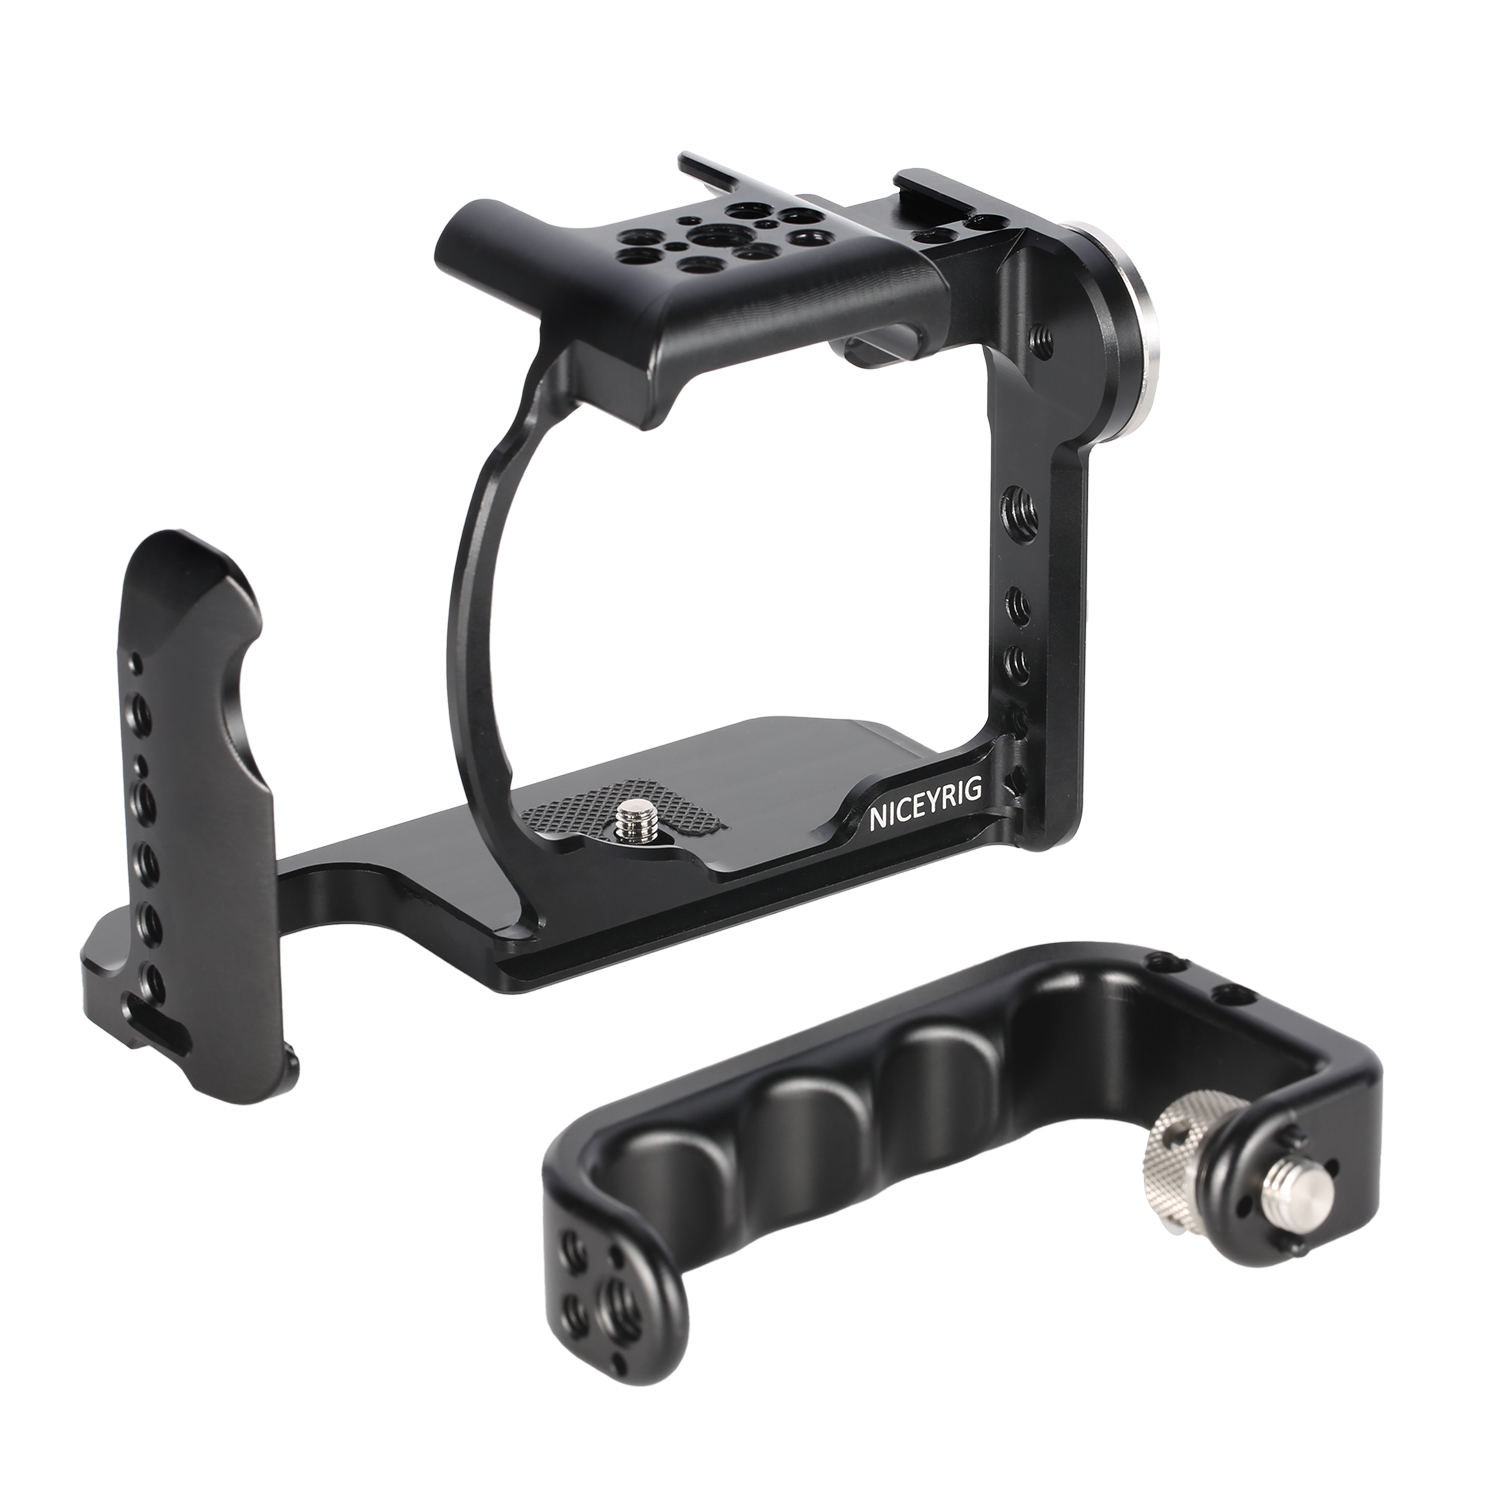 Niceyrig camera cage kit with Arri Locating Top Handle for Sony A7MIV